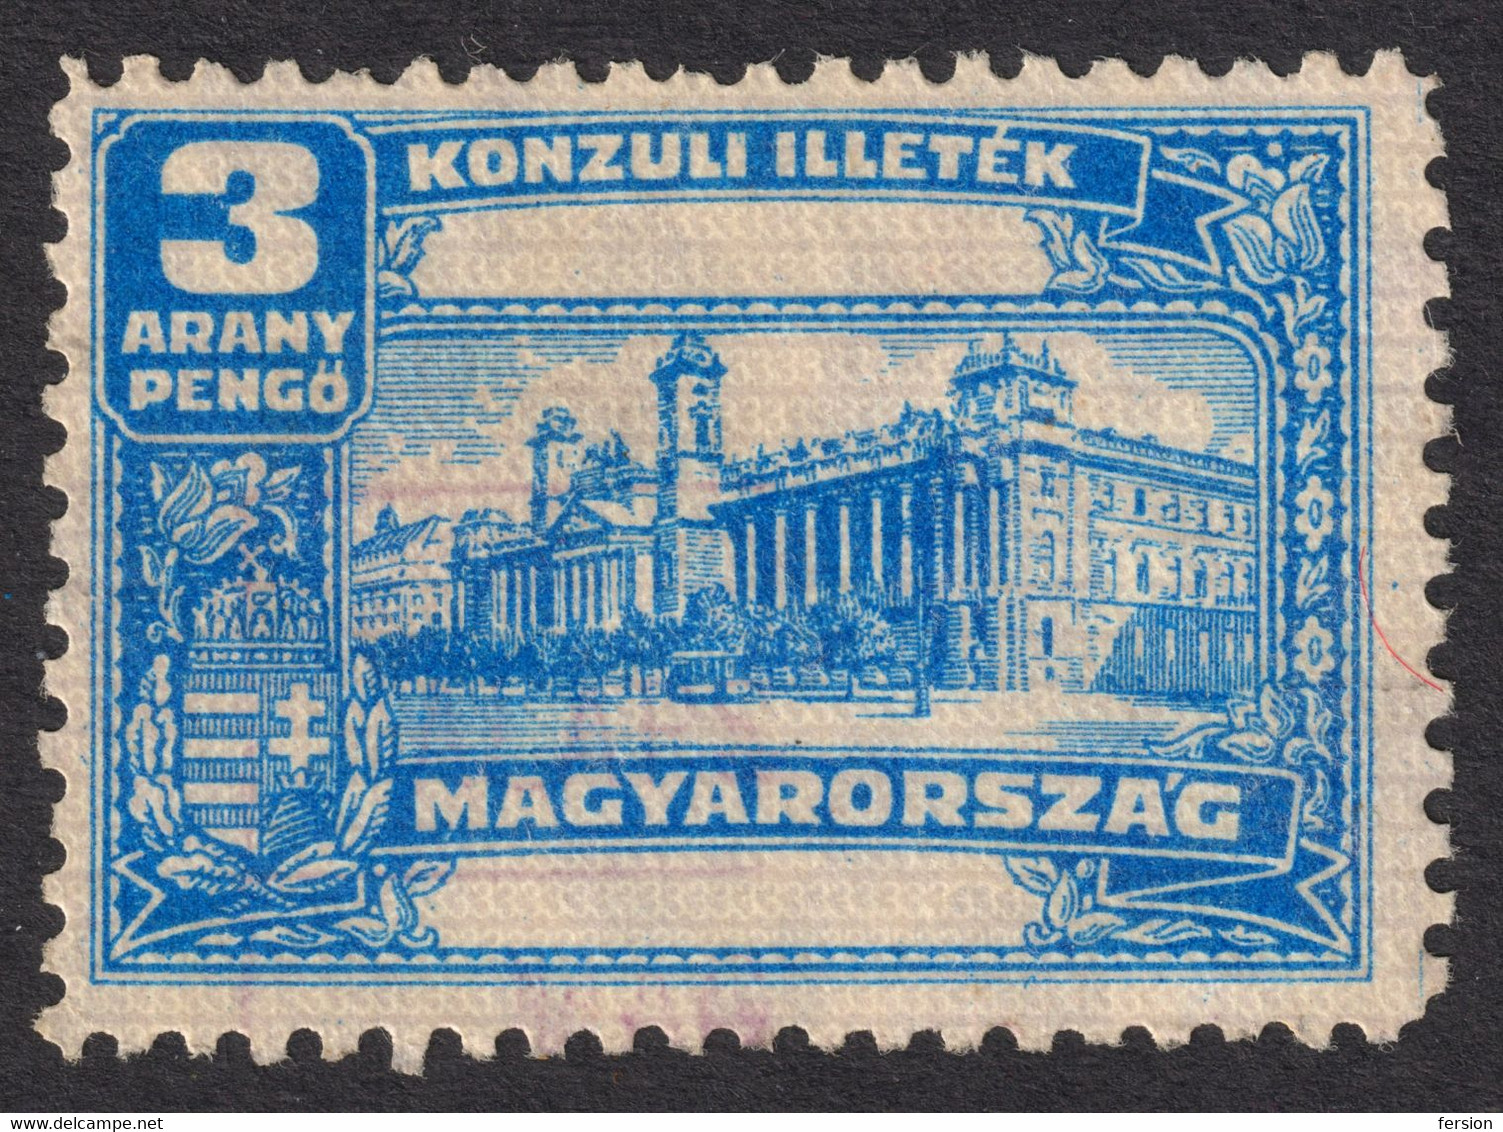 1931 - 1936 Hungary Ungarn Hongrie - Consular Revenue Tax Stamp - 3 A.P Aranypengo - BUDAPEST Stock Exchange Palace - Fiscales